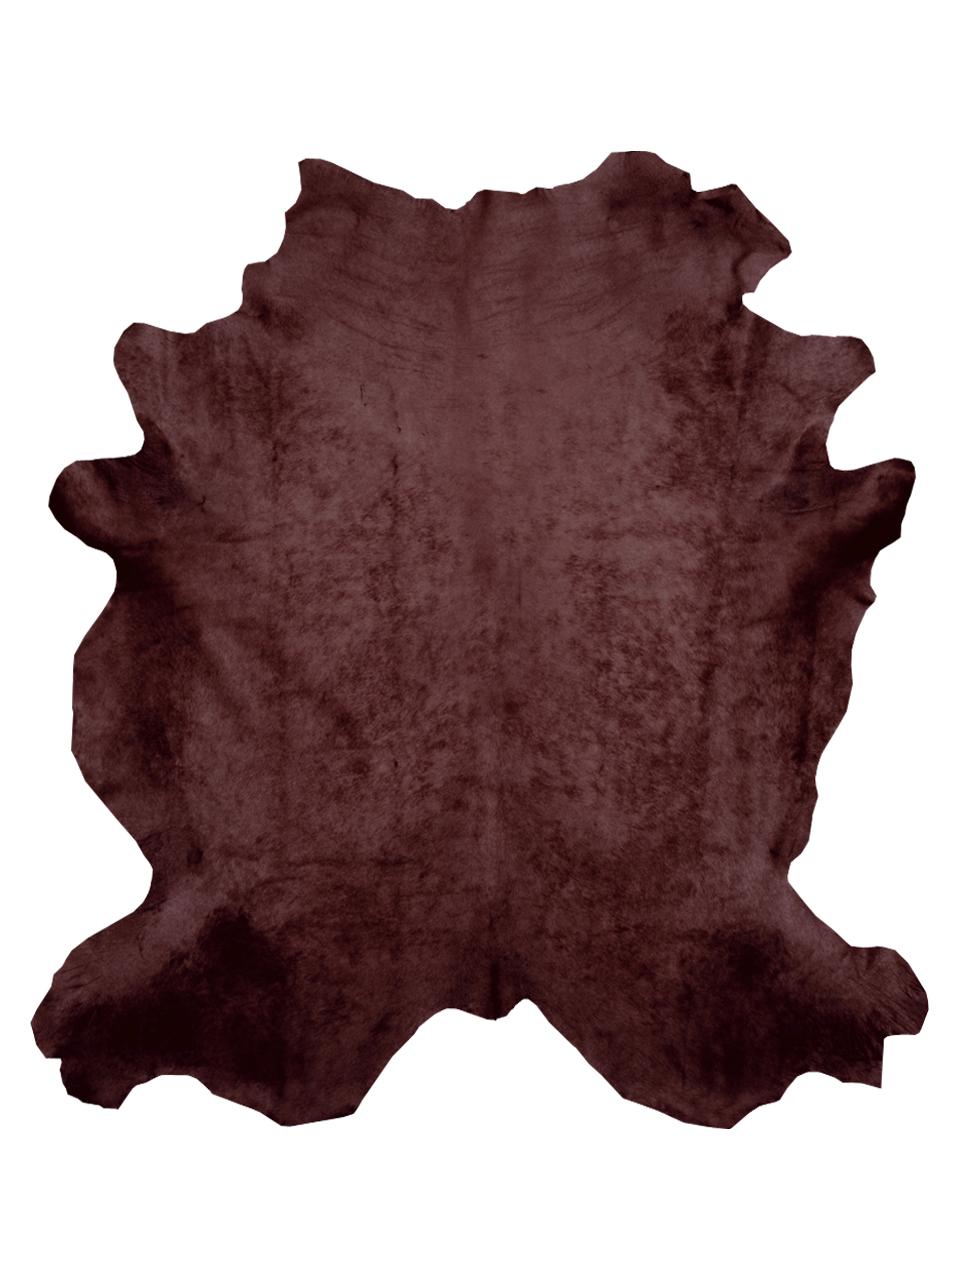 Brown Cowhide rug.

All of our Cowhide rugs are full hides and measure approximately 7' W x 8' L. They are of the highest quality from the French region of Normandy and naturally raised in a free roaming field. The hair of these cows is very